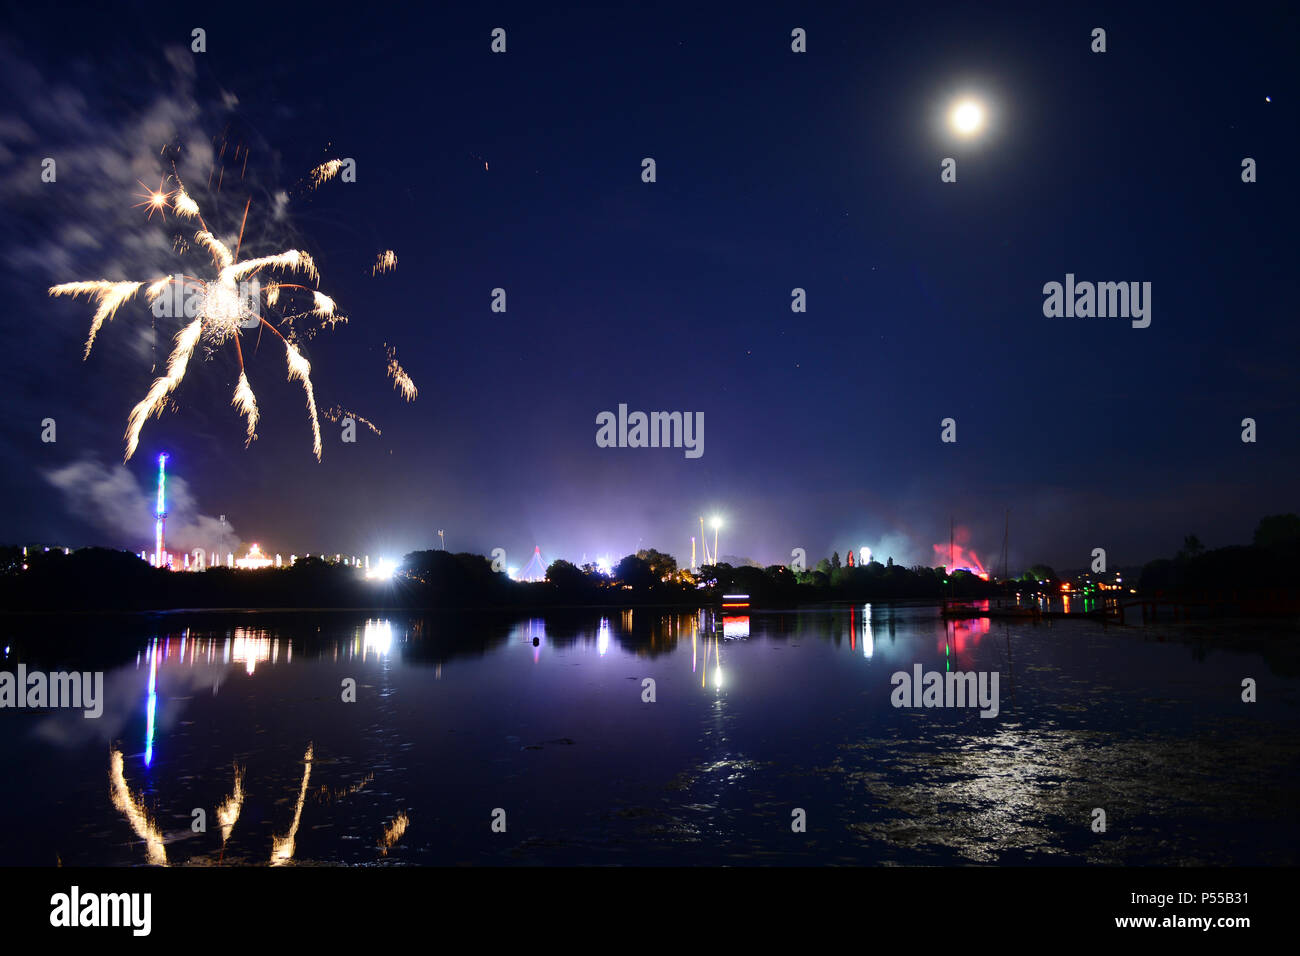 Newport, Isle of Wight, UK. 24th June, 2018. Fireworks and a near full moon herald the end of the last day of the Isle of Wight Festival as the Sunday night headliner band 'The Killers' play on the main stage, seen in the distance in bright lights. Photograph taken from the banks of the River Medina in Newport, Isle of Wight, June 24th 2018. Credit: Matthew Blythe/Alamy Live News Stock Photo